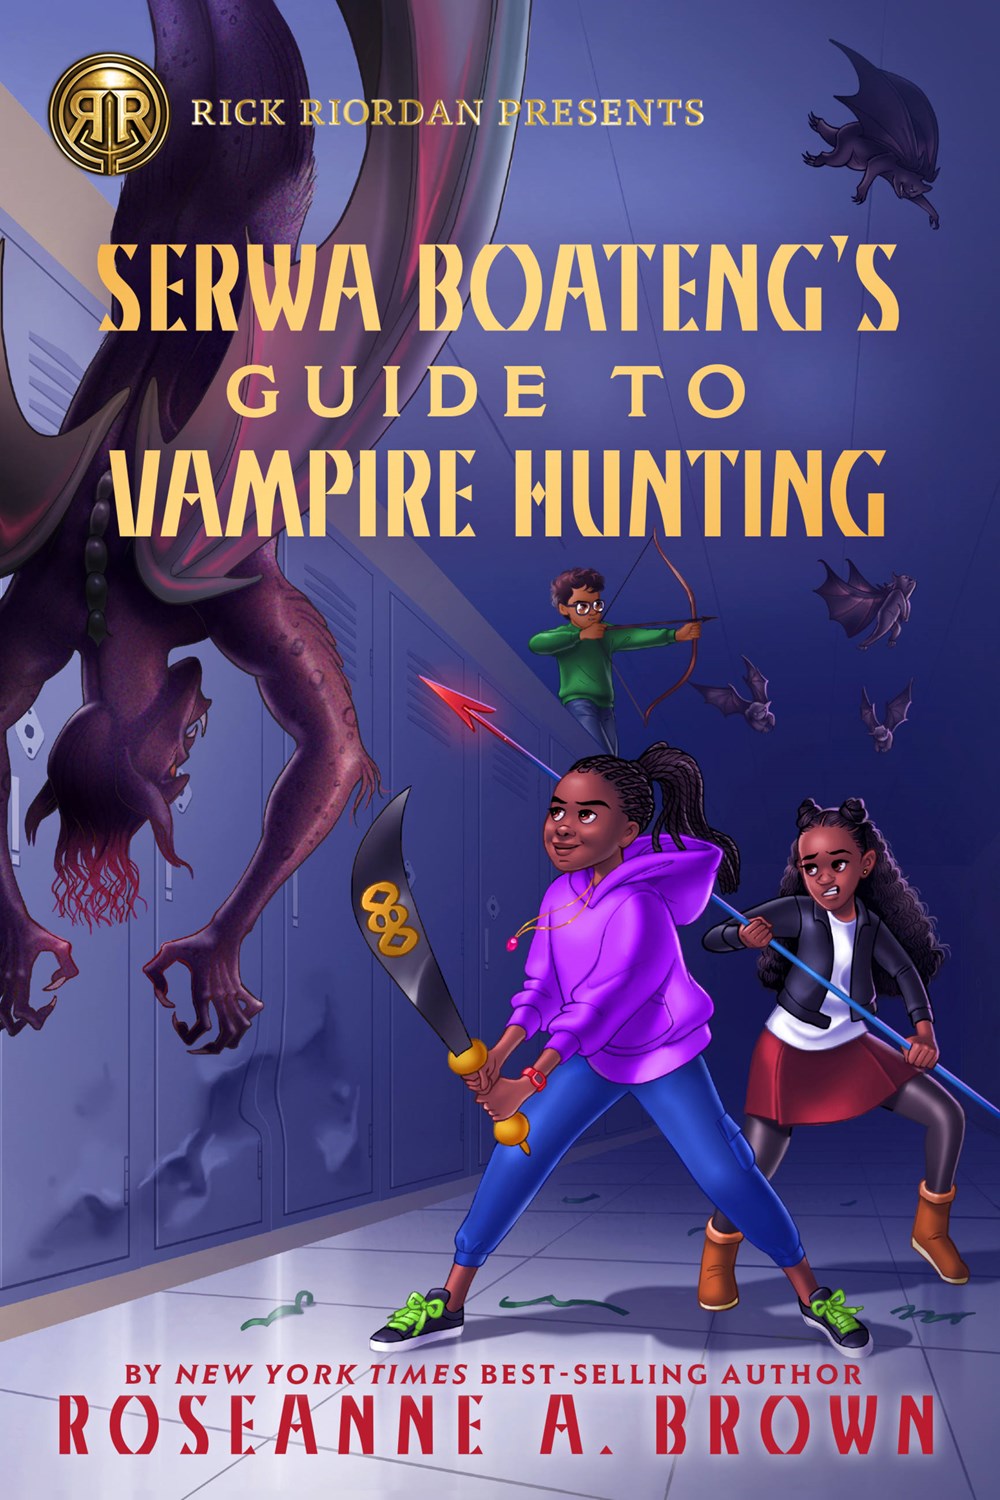 Serwa Boateng's Guide to Vampire Hunting by Roseanne Brown